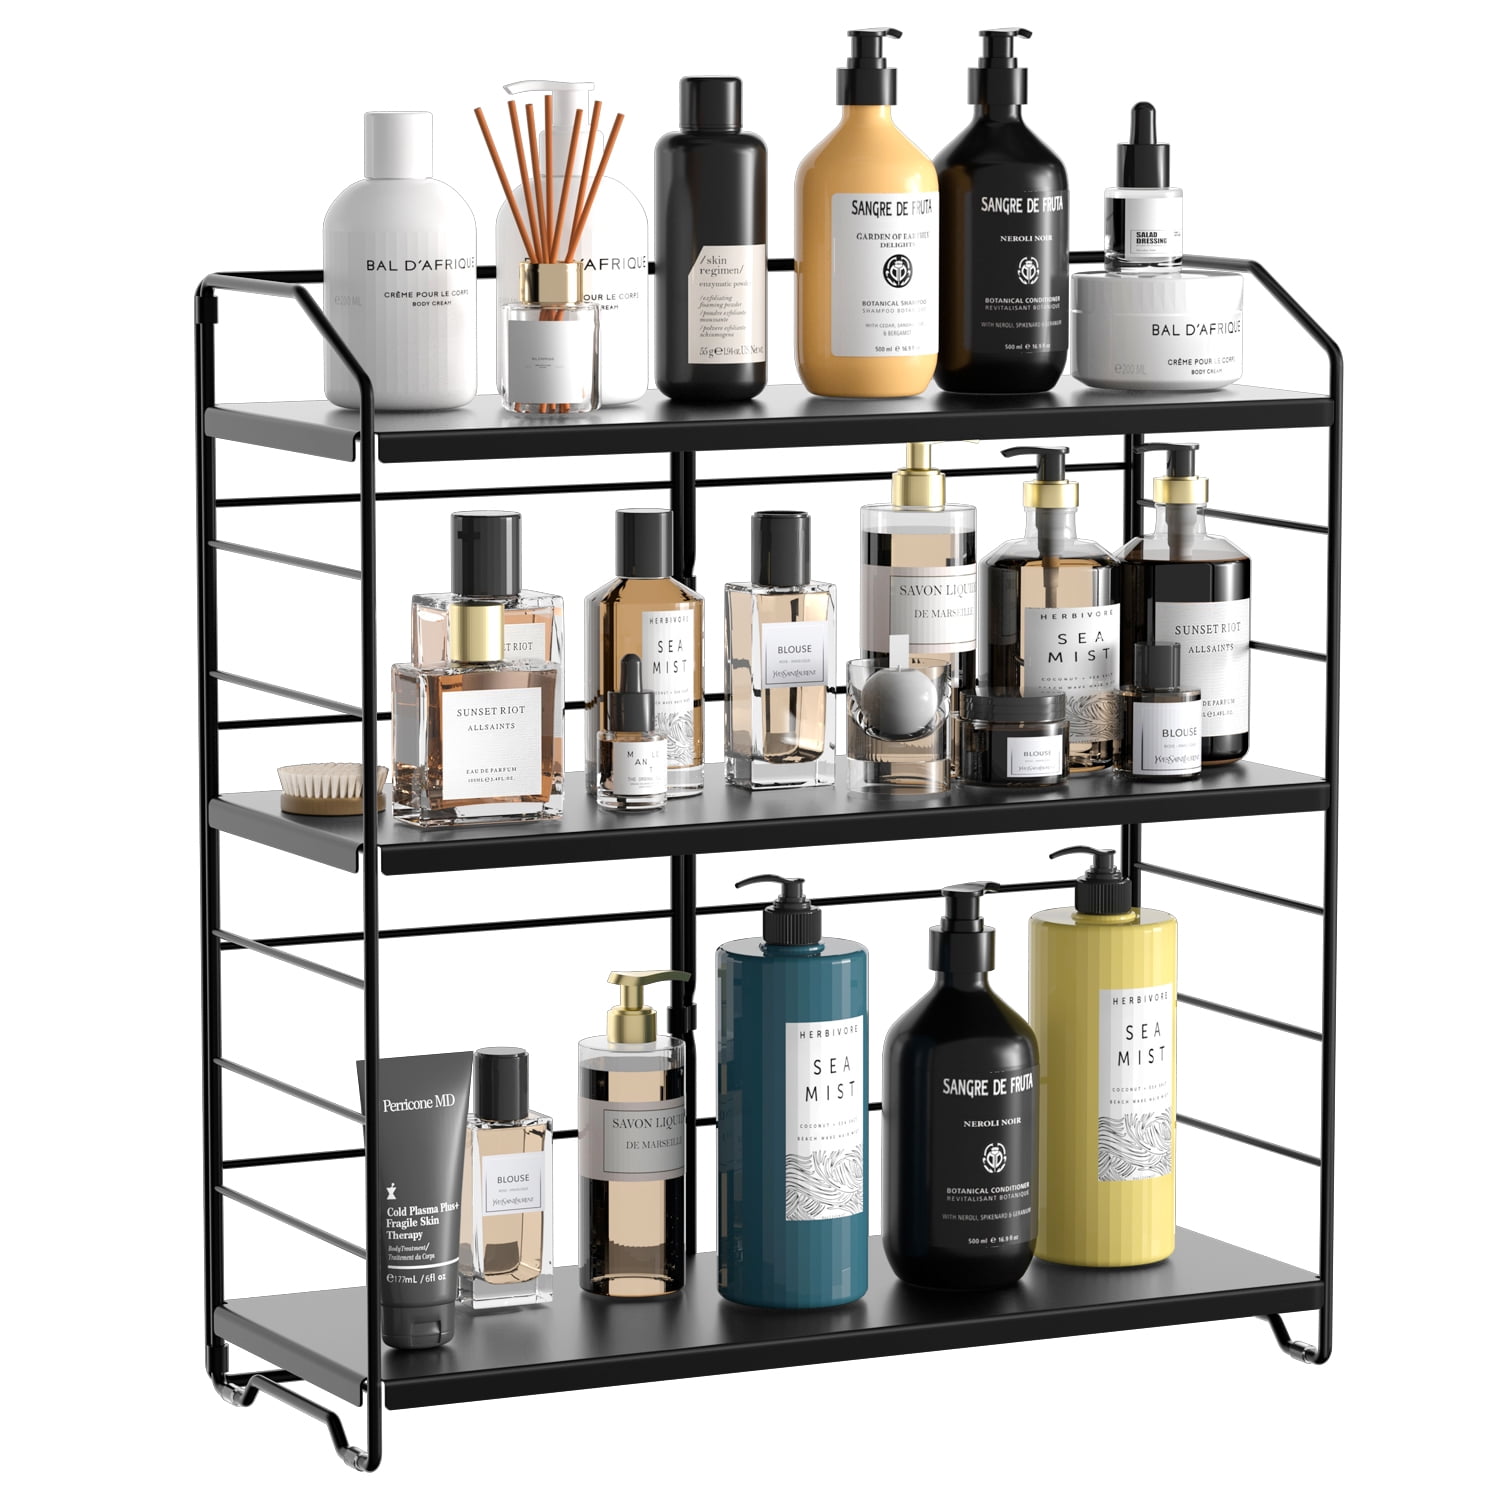 Bossman Bamboo Bathroom Countertop Organizer for Toiletries, Accessories and Grooming Products Storage and Counter Organization (Black)